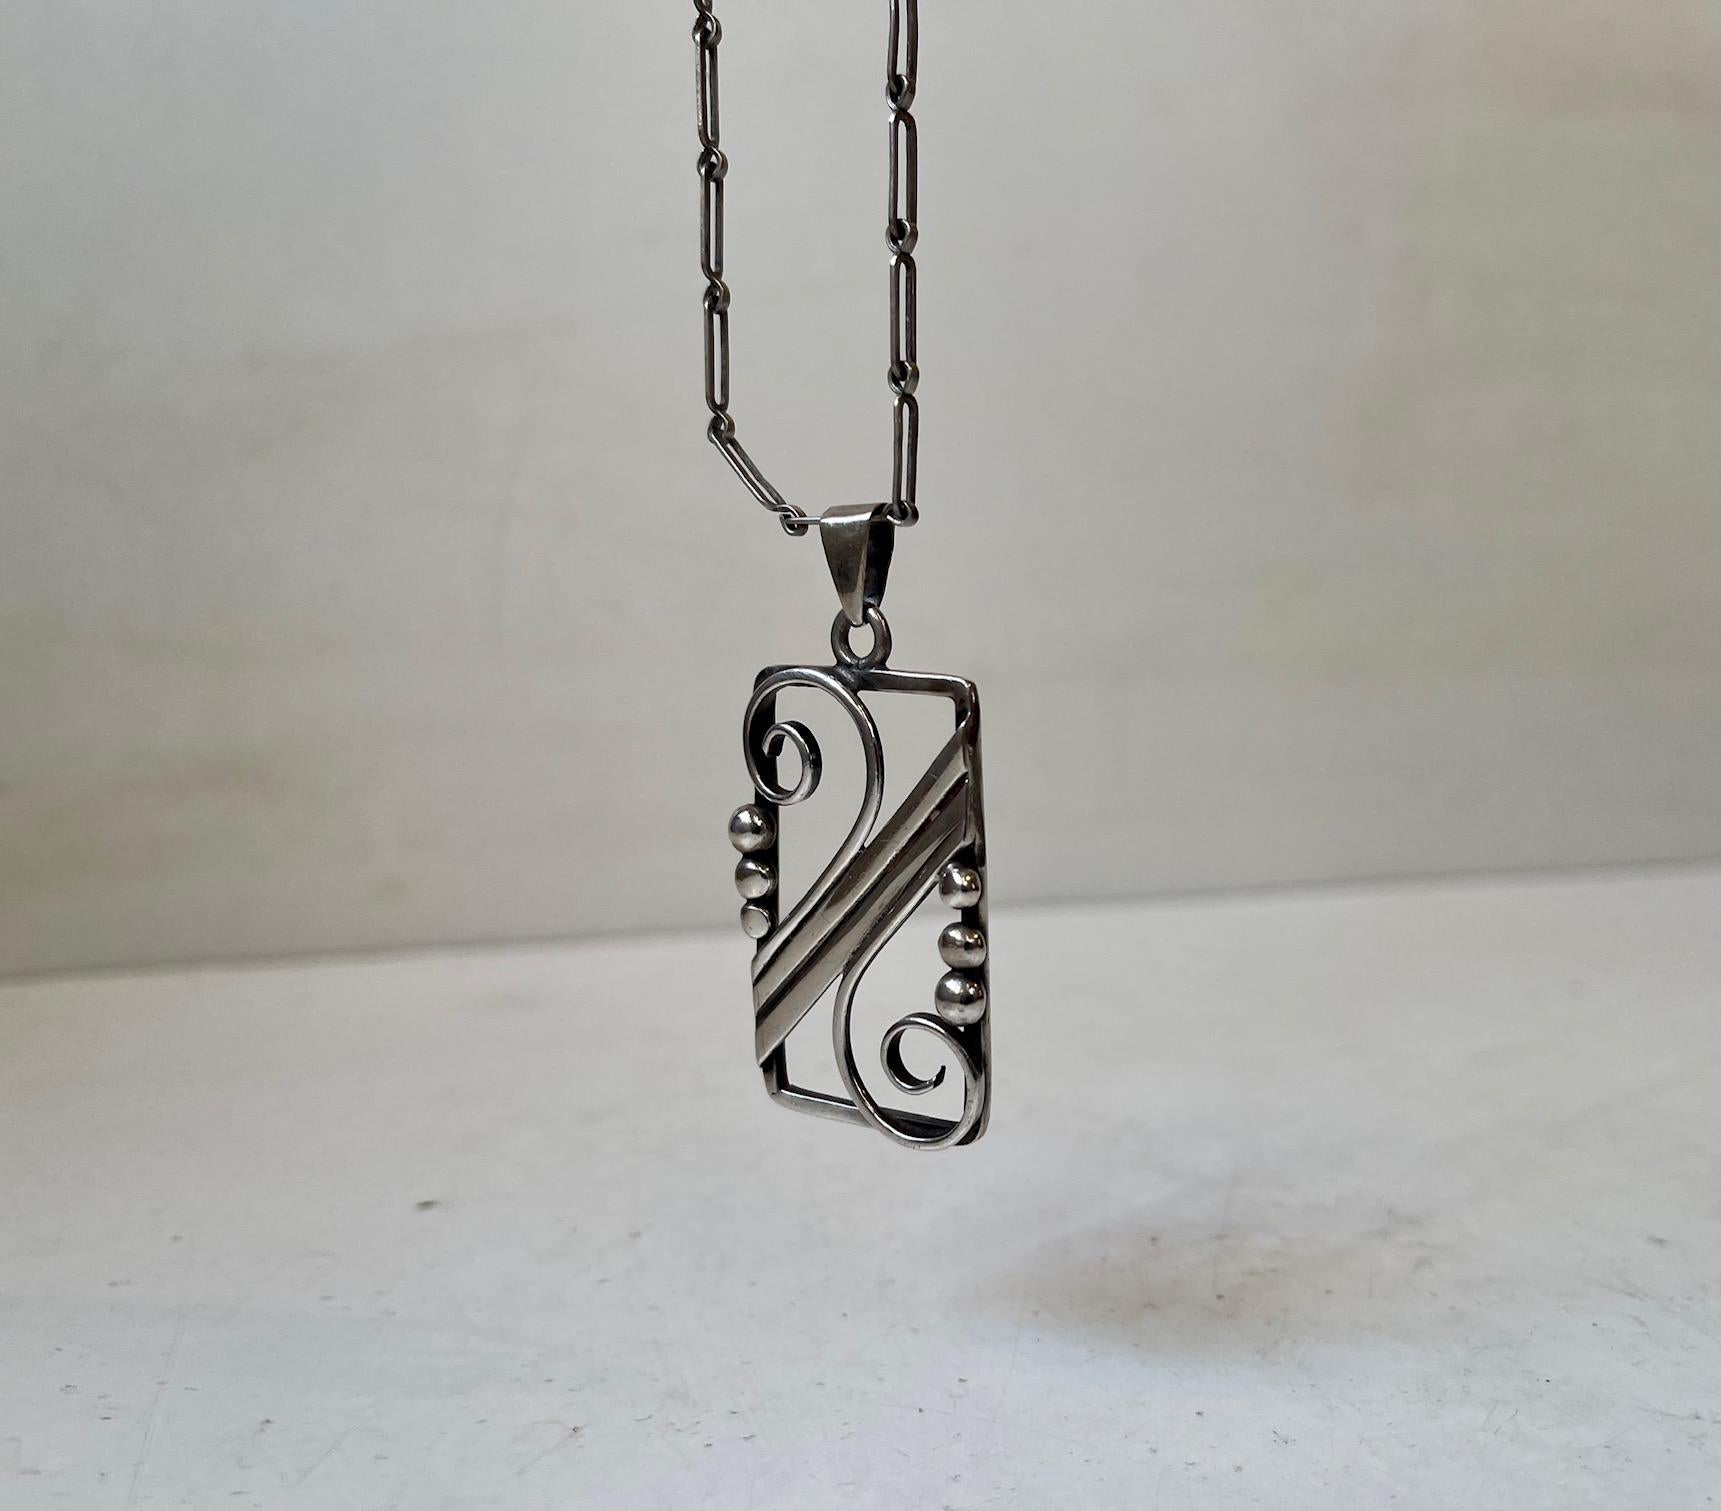 Antique Jugend, Art Nouveau Pendant Necklace in Silver by F. Bang Denmark In Good Condition For Sale In Esbjerg, DK